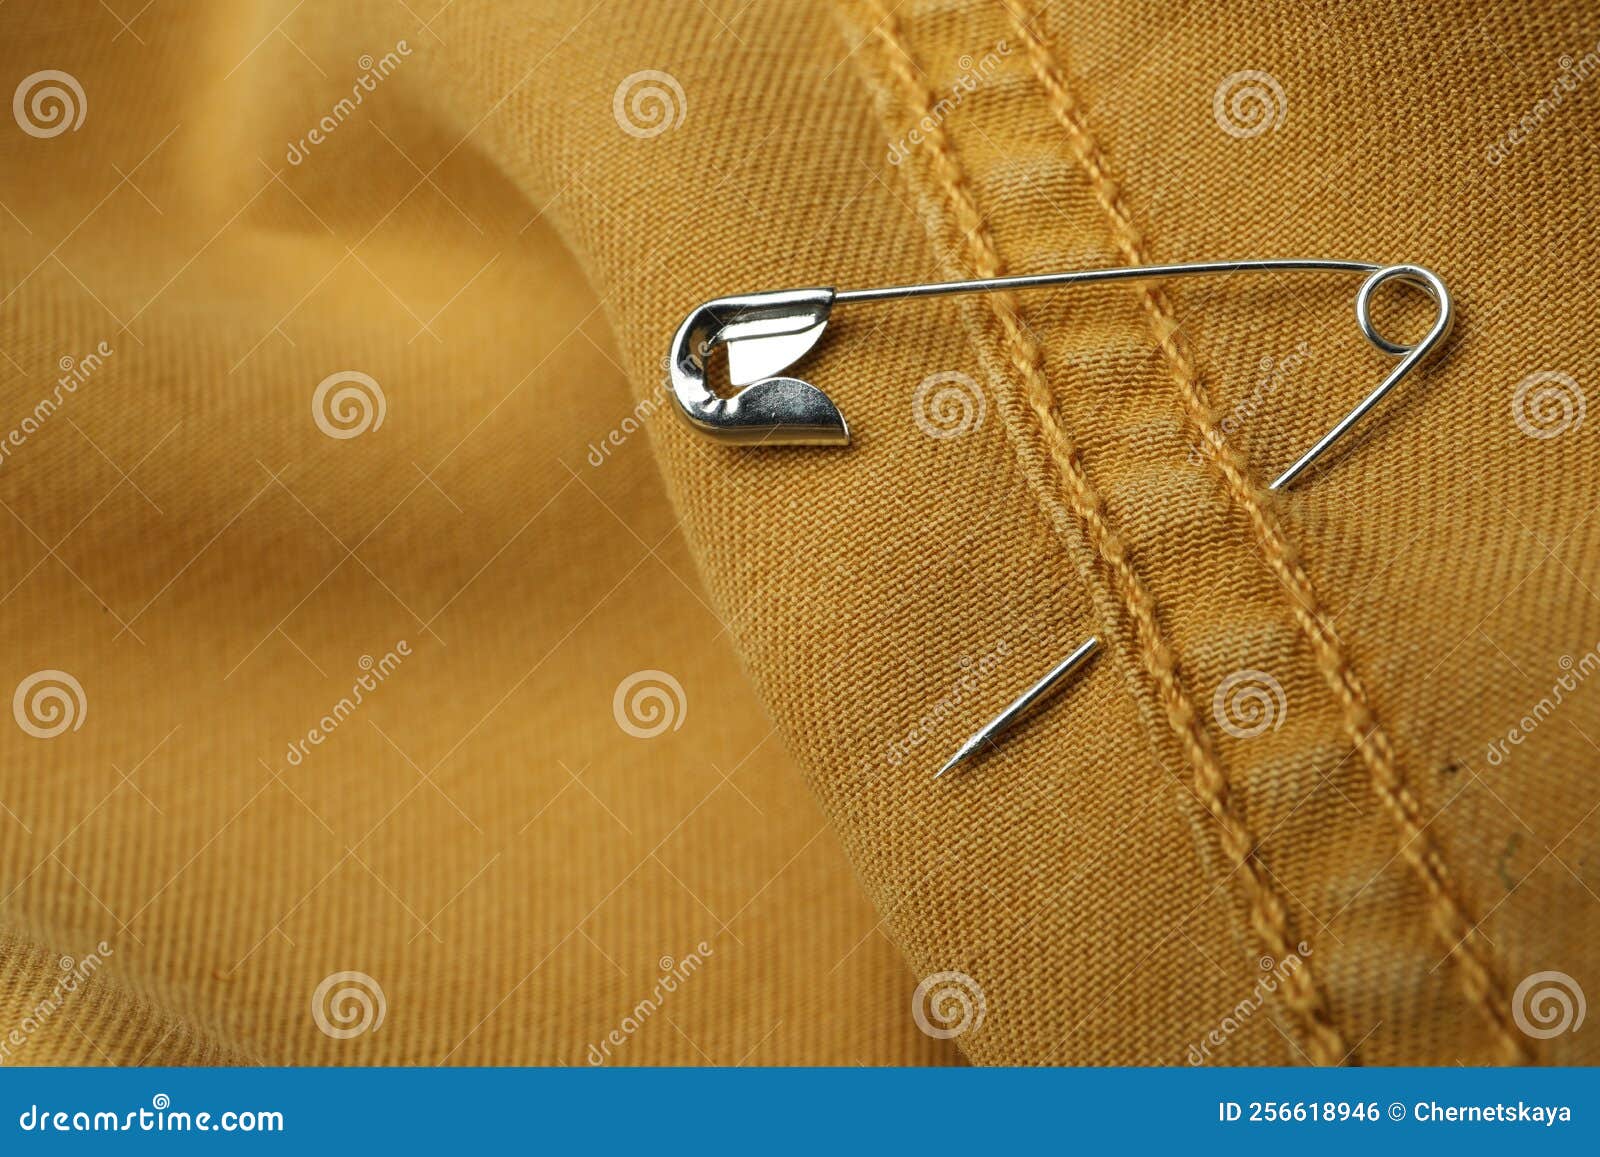 Pin on Clothing